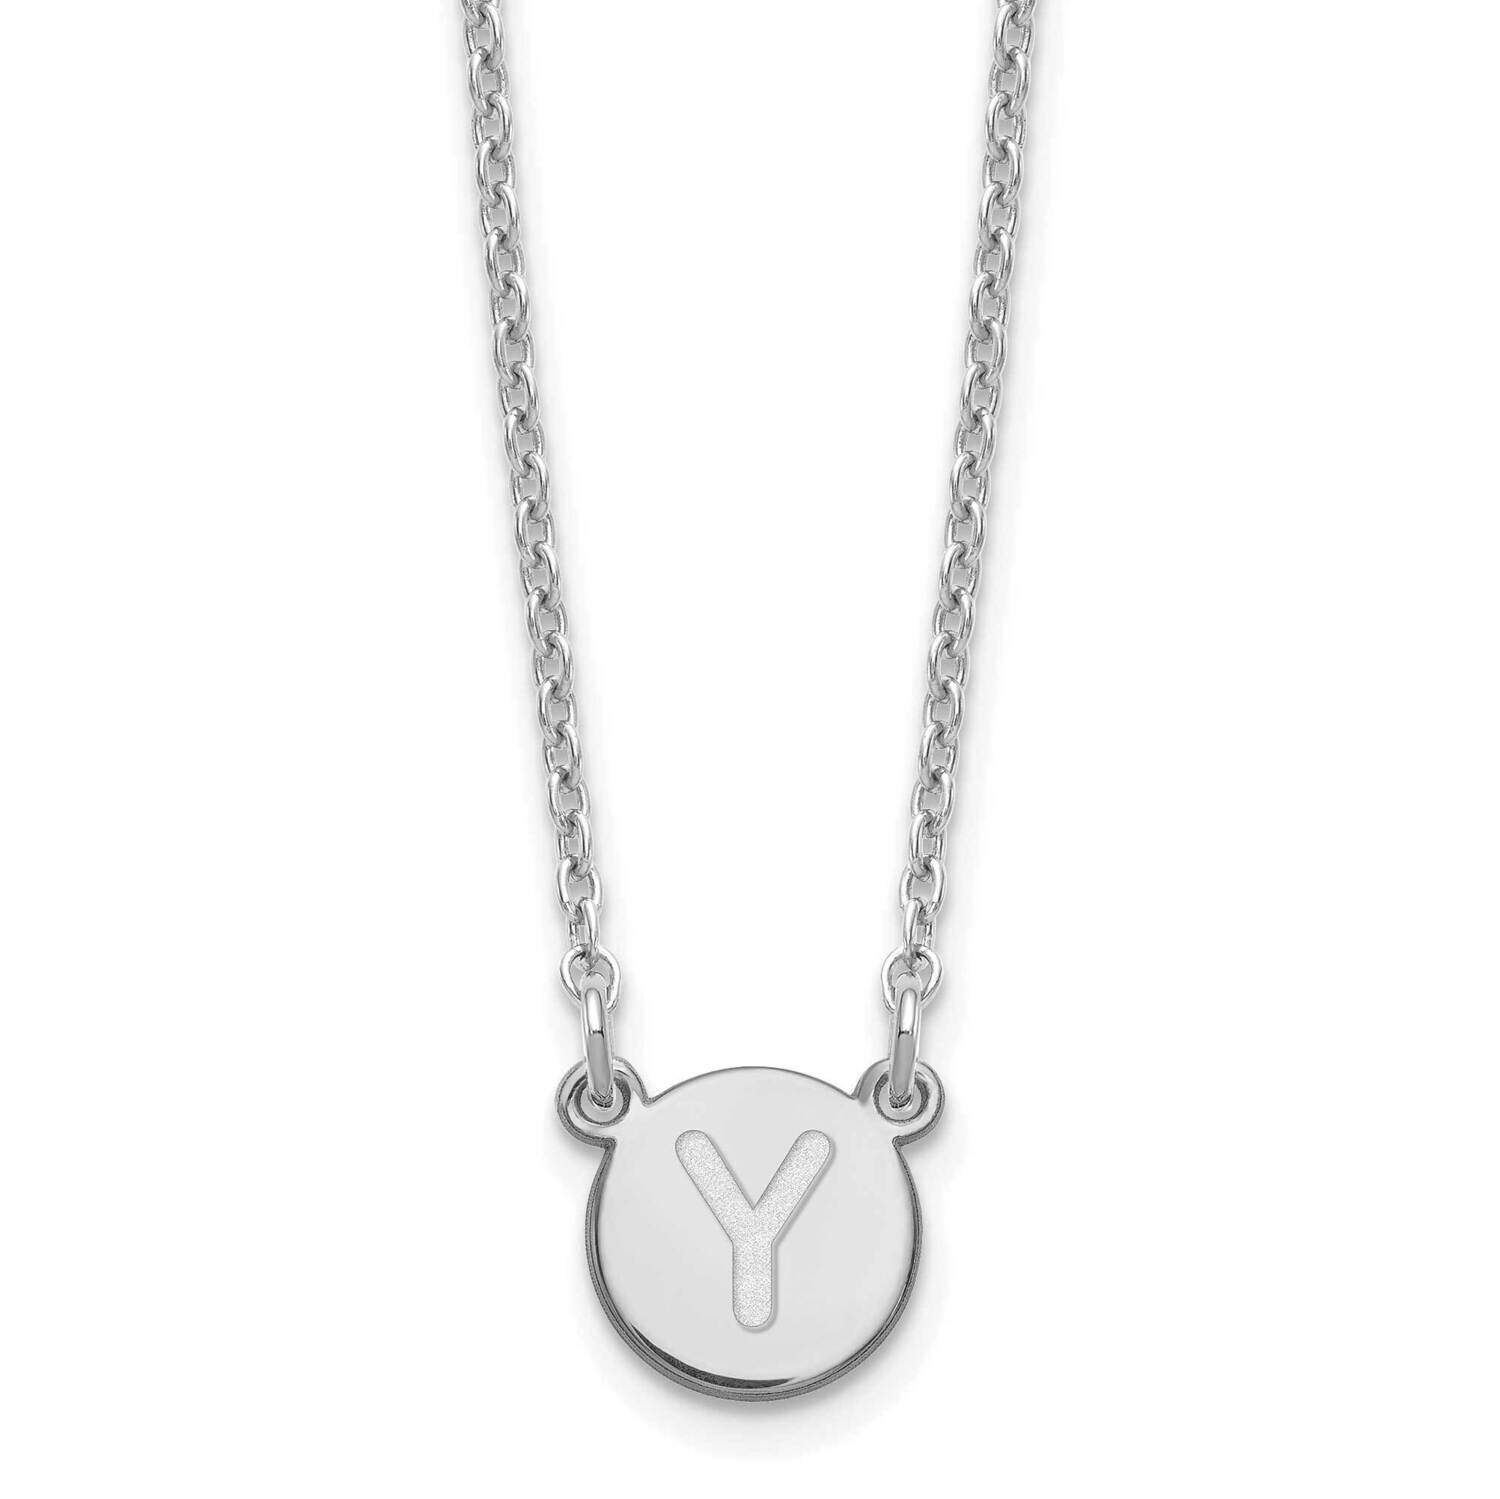 Tiny Circle Block Letter Y Initial Necklace Sterling Silver Rhodium-Plated XNA722SS/Y